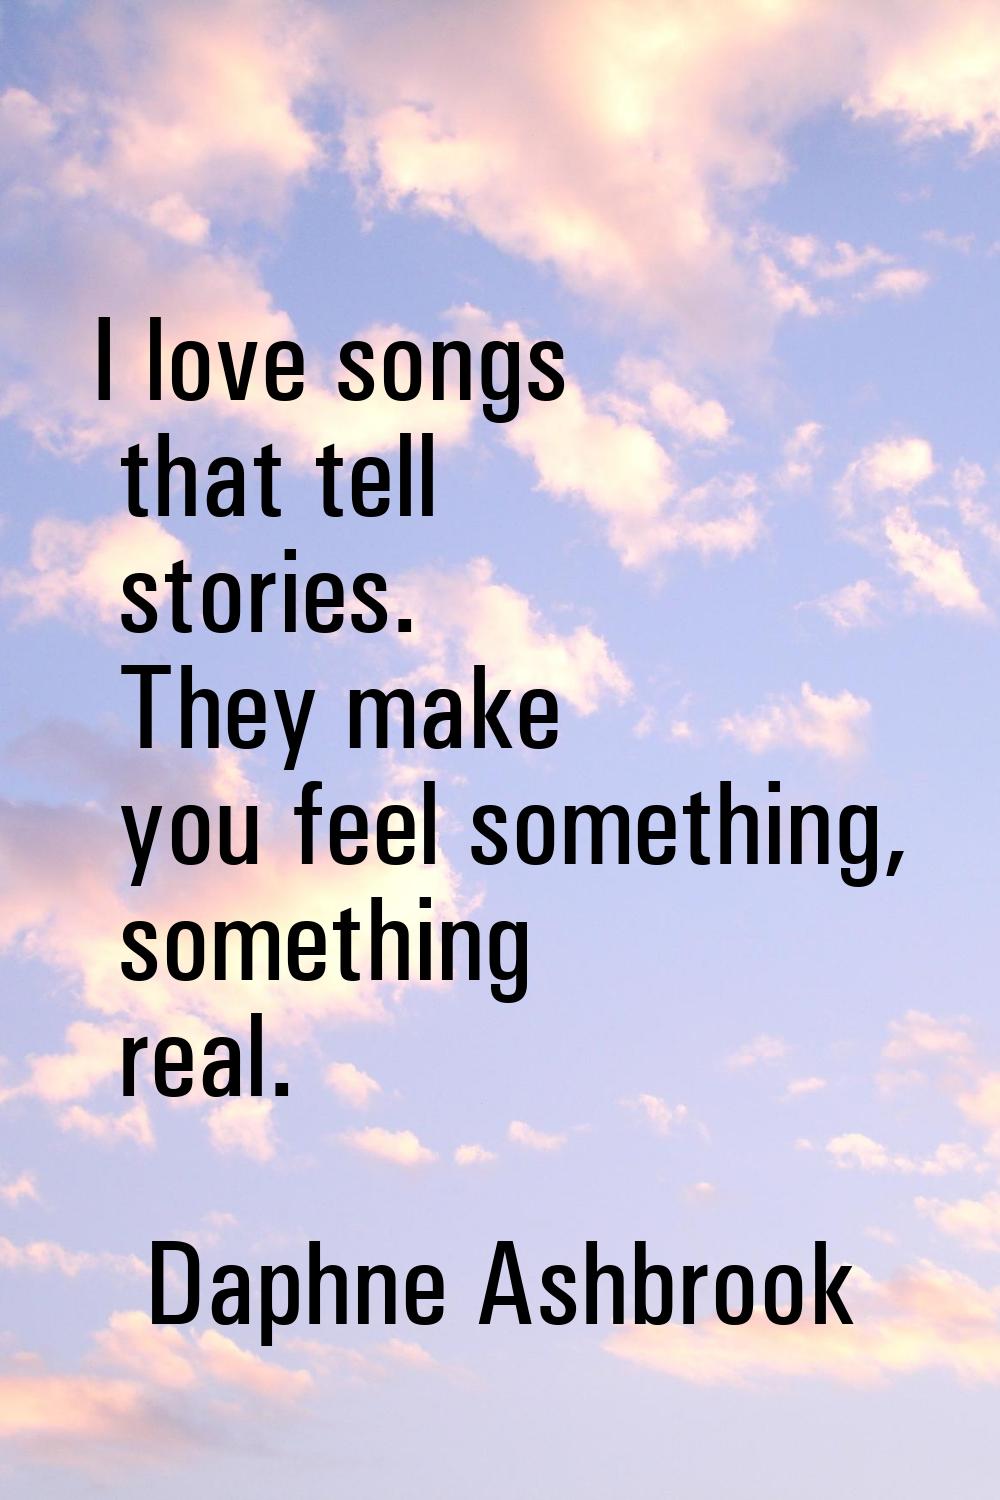 I love songs that tell stories. They make you feel something, something real.